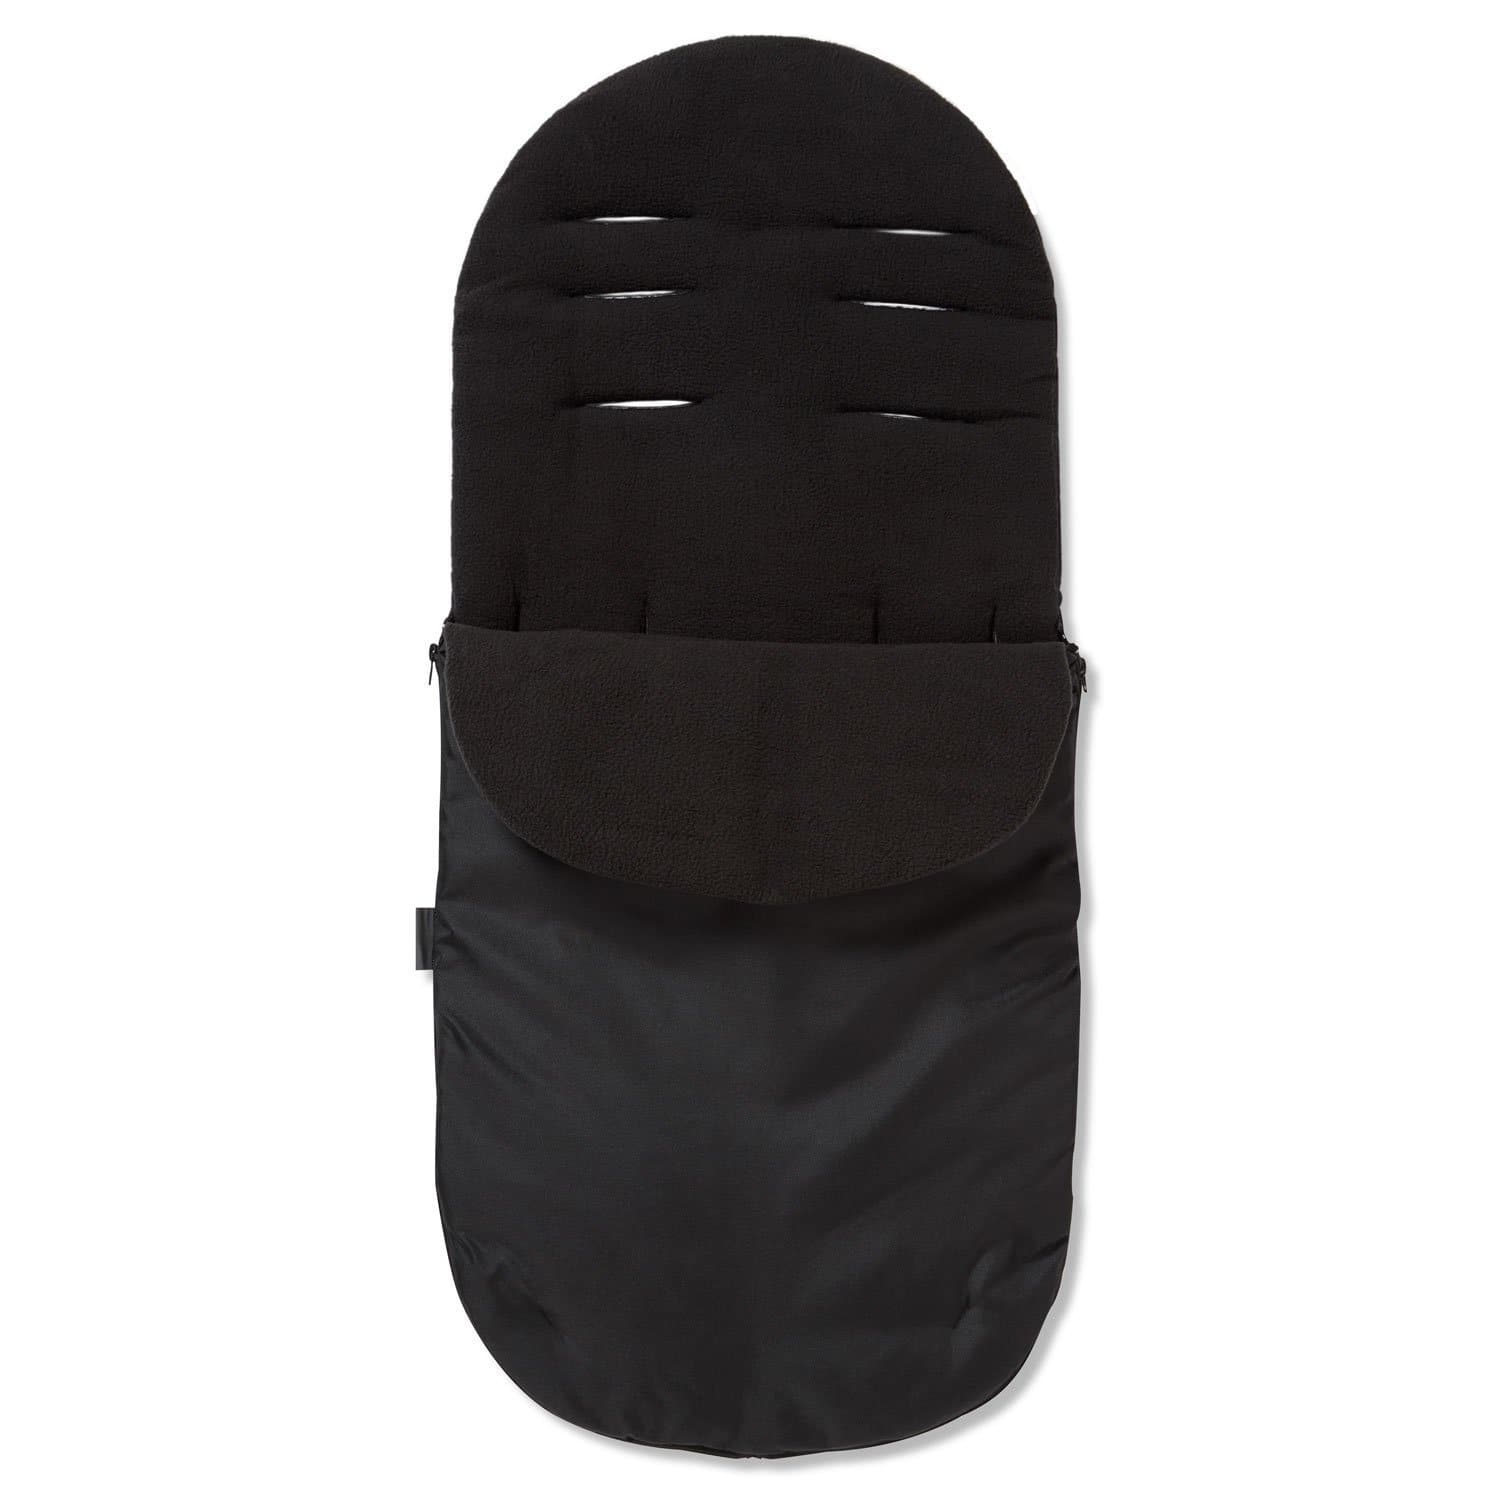 Footmuff / Cosy Toes Compatible with Mothercare - Black / Fits All Models | For Your Little One